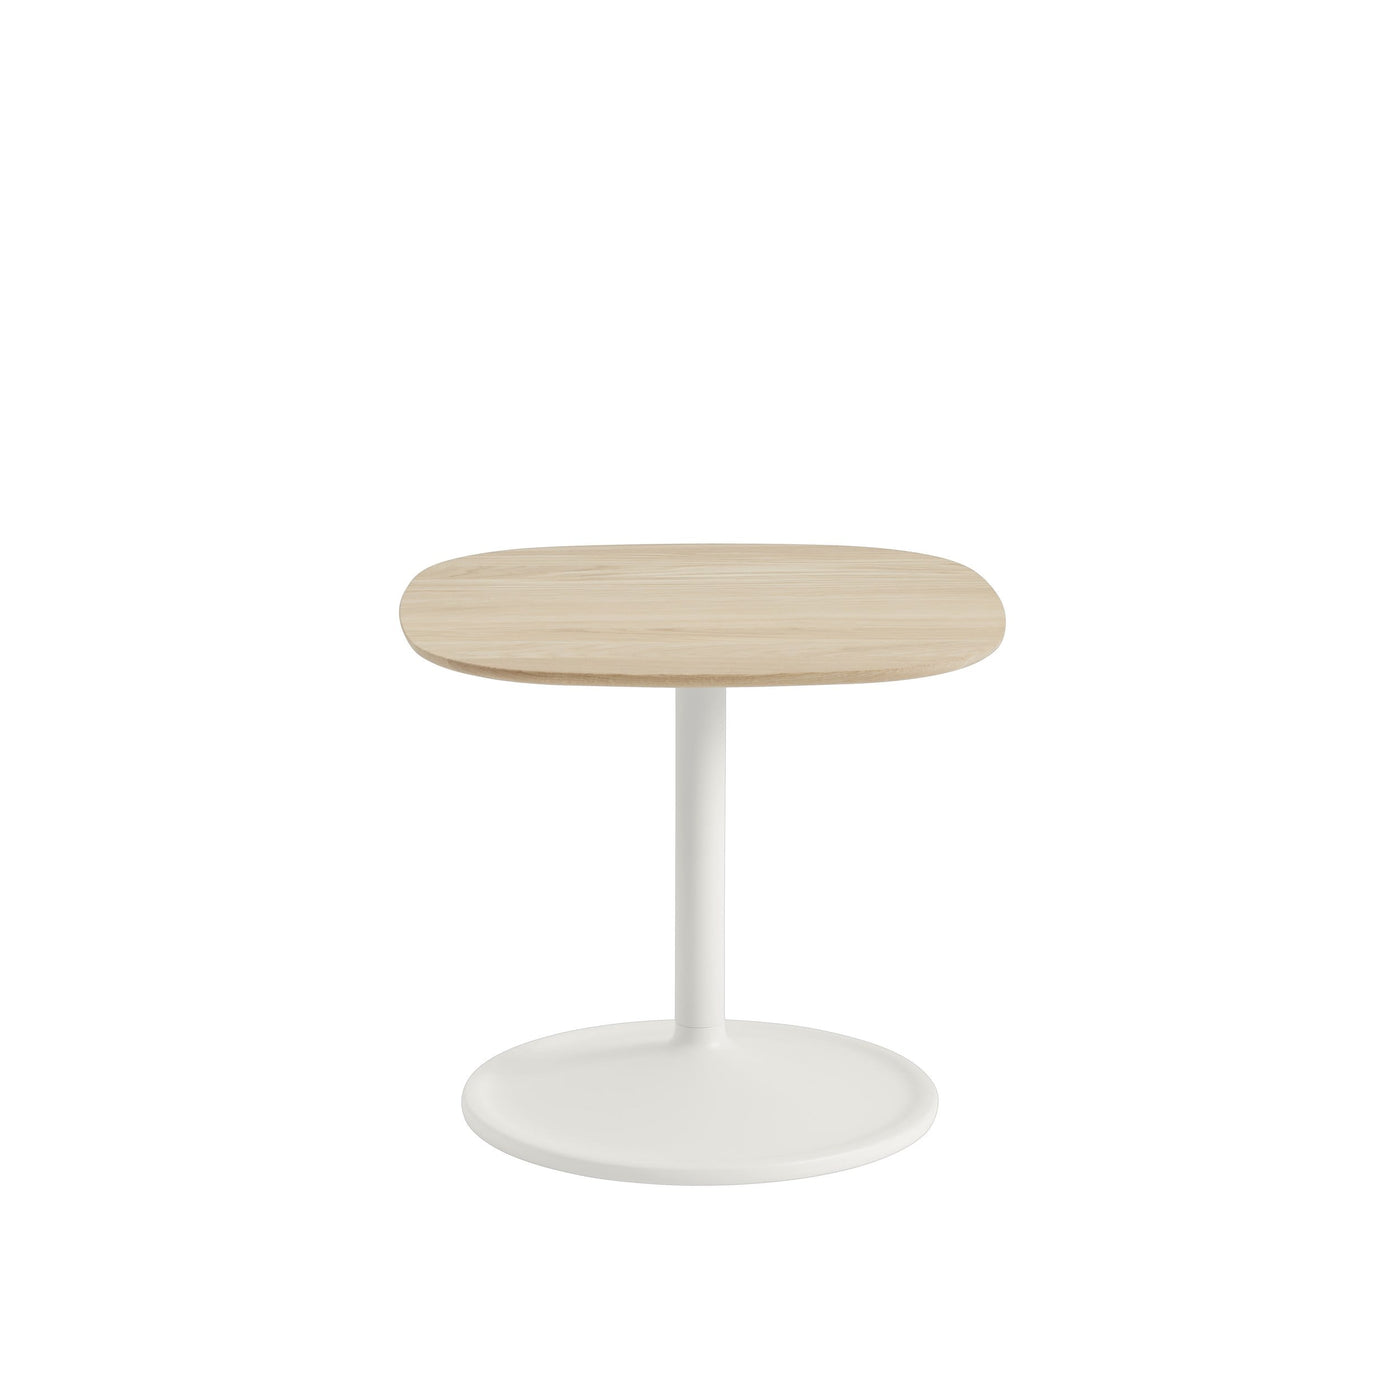 Muuto Soft side table Ø45 x 40cm high. Shop online at someday designs. #colour_solid-oak-off-white